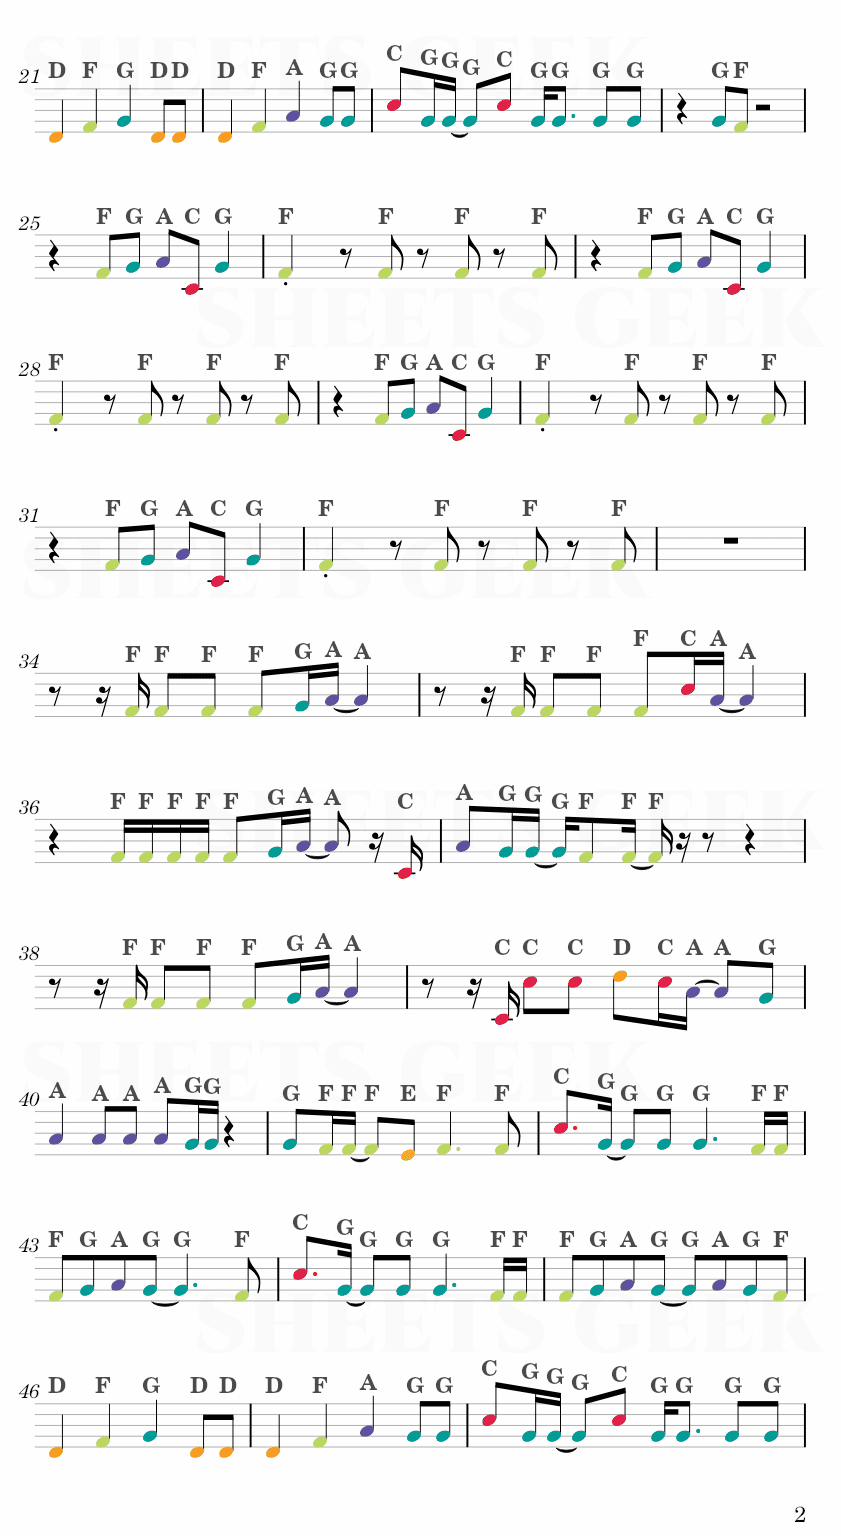 Don't Wanna Cry - SEVENTEEN Easy Sheet Music Free for piano, keyboard, flute, violin, sax, cello page 2